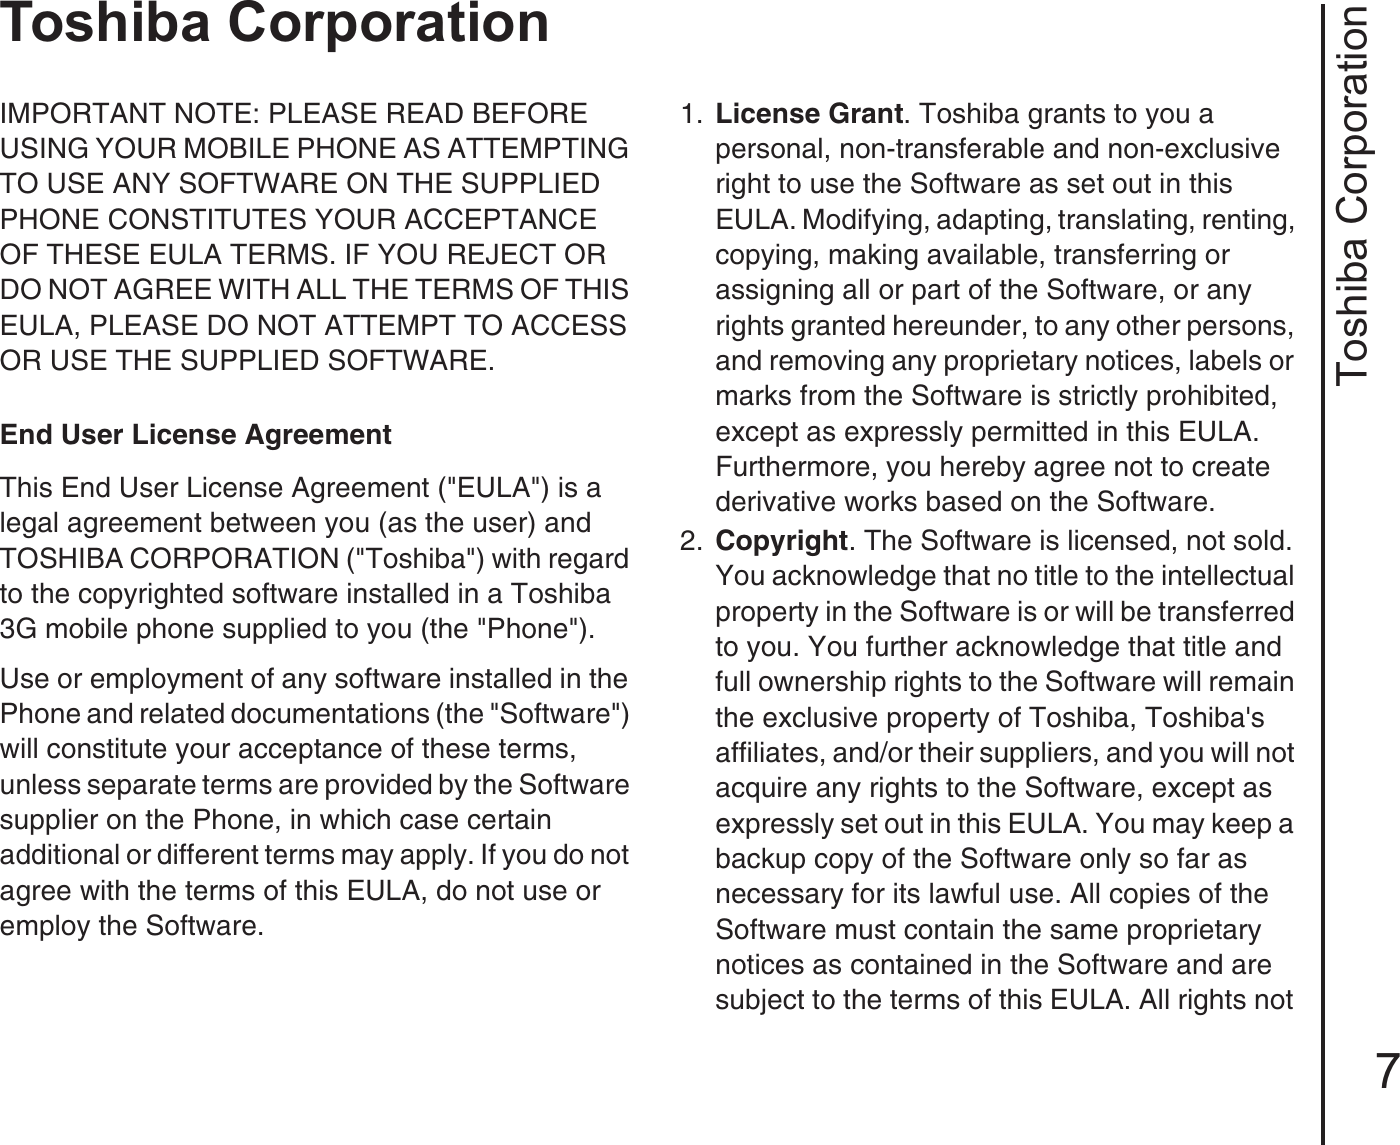 Toshiba Corporation7Toshiba CorporationToshiba CorporationIMPORTANT NOTE: PLEASE READ BEFORE USING YOUR MOBILE PHONE AS ATTEMPTING TO USE ANY SOFTWARE ON THE SUPPLIED PHONE CONSTITUTES YOUR ACCEPTANCE OF THESE EULA TERMS. IF YOU REJECT OR DO NOT AGREE WITH ALL THE TERMS OF THIS EULA, PLEASE DO NOT ATTEMPT TO ACCESS OR USE THE SUPPLIED SOFTWARE. End User License AgreementThis End User License Agreement (&quot;EULA&quot;) is a legal agreement between you (as the user) and TOSHIBA CORPORATION (&quot;Toshiba&quot;) with regard to the copyrighted software installed in a Toshiba 3G mobile phone supplied to you (the &quot;Phone&quot;).Use or employment of any software installed in the Phone and related documentations (the &quot;Software&quot;) will constitute your acceptance of these terms, unless separate terms are provided by the Software supplier on the Phone, in which case certain additional or different terms may apply. If you do not agree with the terms of this EULA, do not use or employ the Software. 1.  License Grant. Toshiba grants to you a personal, non-transferable and non-exclusive right to use the Software as set out in this EULA. Modifying, adapting, translating, renting, copying, making available, transferring or assigning all or part of the Software, or any rights granted hereunder, to any other persons, and removing any proprietary notices, labels or marks from the Software is strictly prohibited, except as expressly permitted in this EULA. Furthermore, you hereby agree not to create derivative works based on the Software.2.  Copyright. The Software is licensed, not sold. You acknowledge that no title to the intellectual property in the Software is or will be transferred to you. You further acknowledge that title and full ownership rights to the Software will remain the exclusive property of Toshiba, Toshiba&apos;s affiliates, and/or their suppliers, and you will not acquire any rights to the Software, except as expressly set out in this EULA. You may keep a backup copy of the Software only so far as necessary for its lawful use. All copies of the Software must contain the same proprietary notices as contained in the Software and are subject to the terms of this EULA. All rights not 